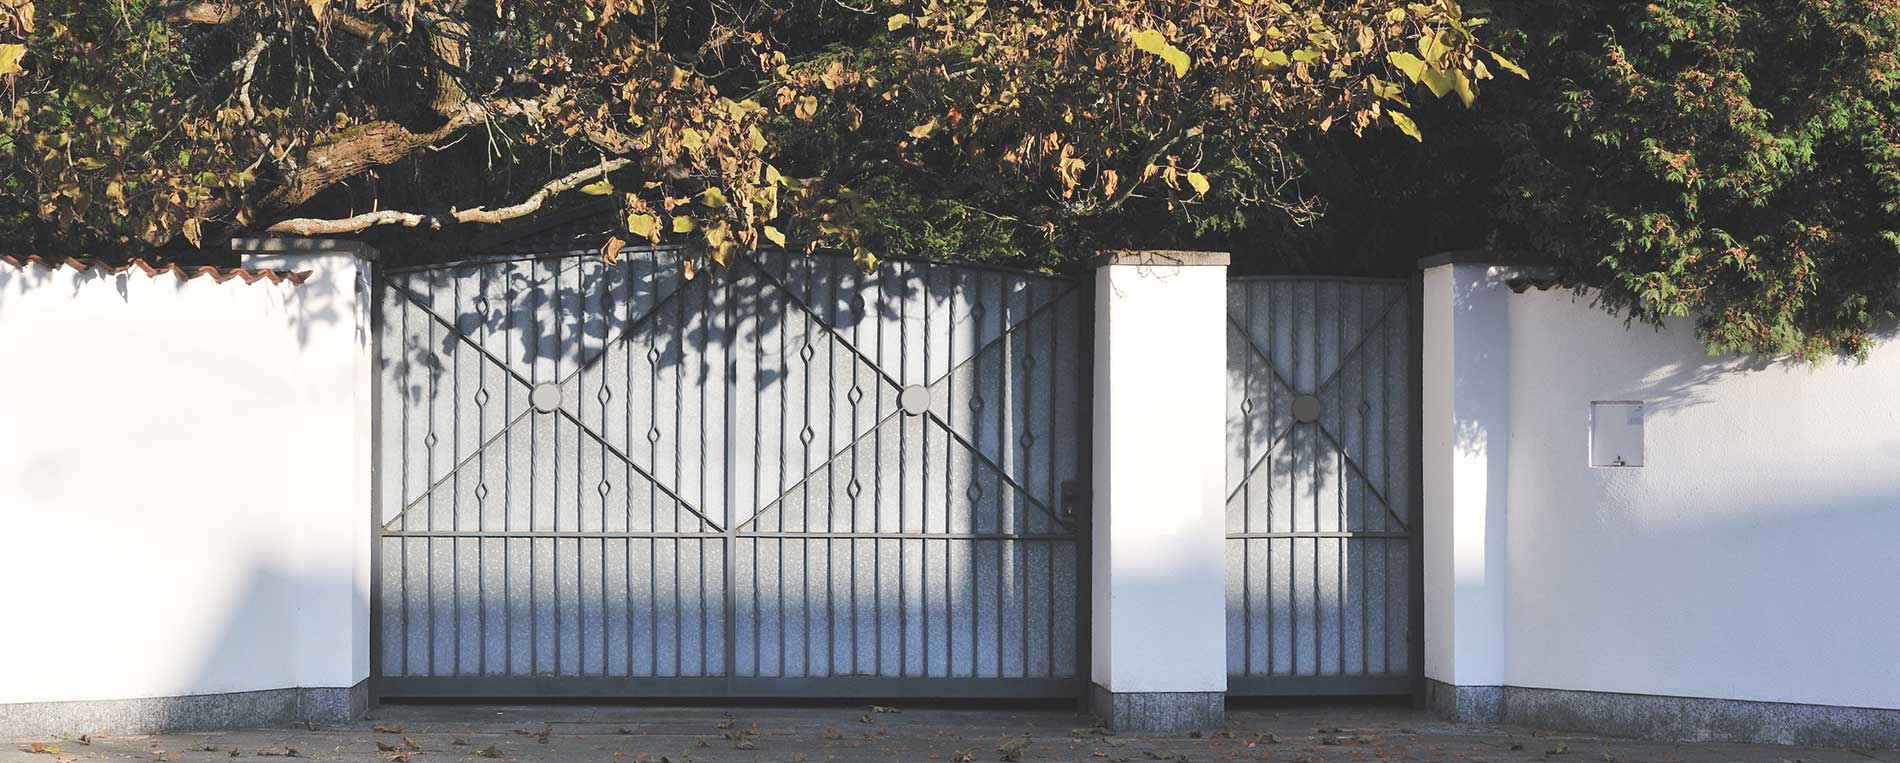 Different Types of Driveway Gate Materials